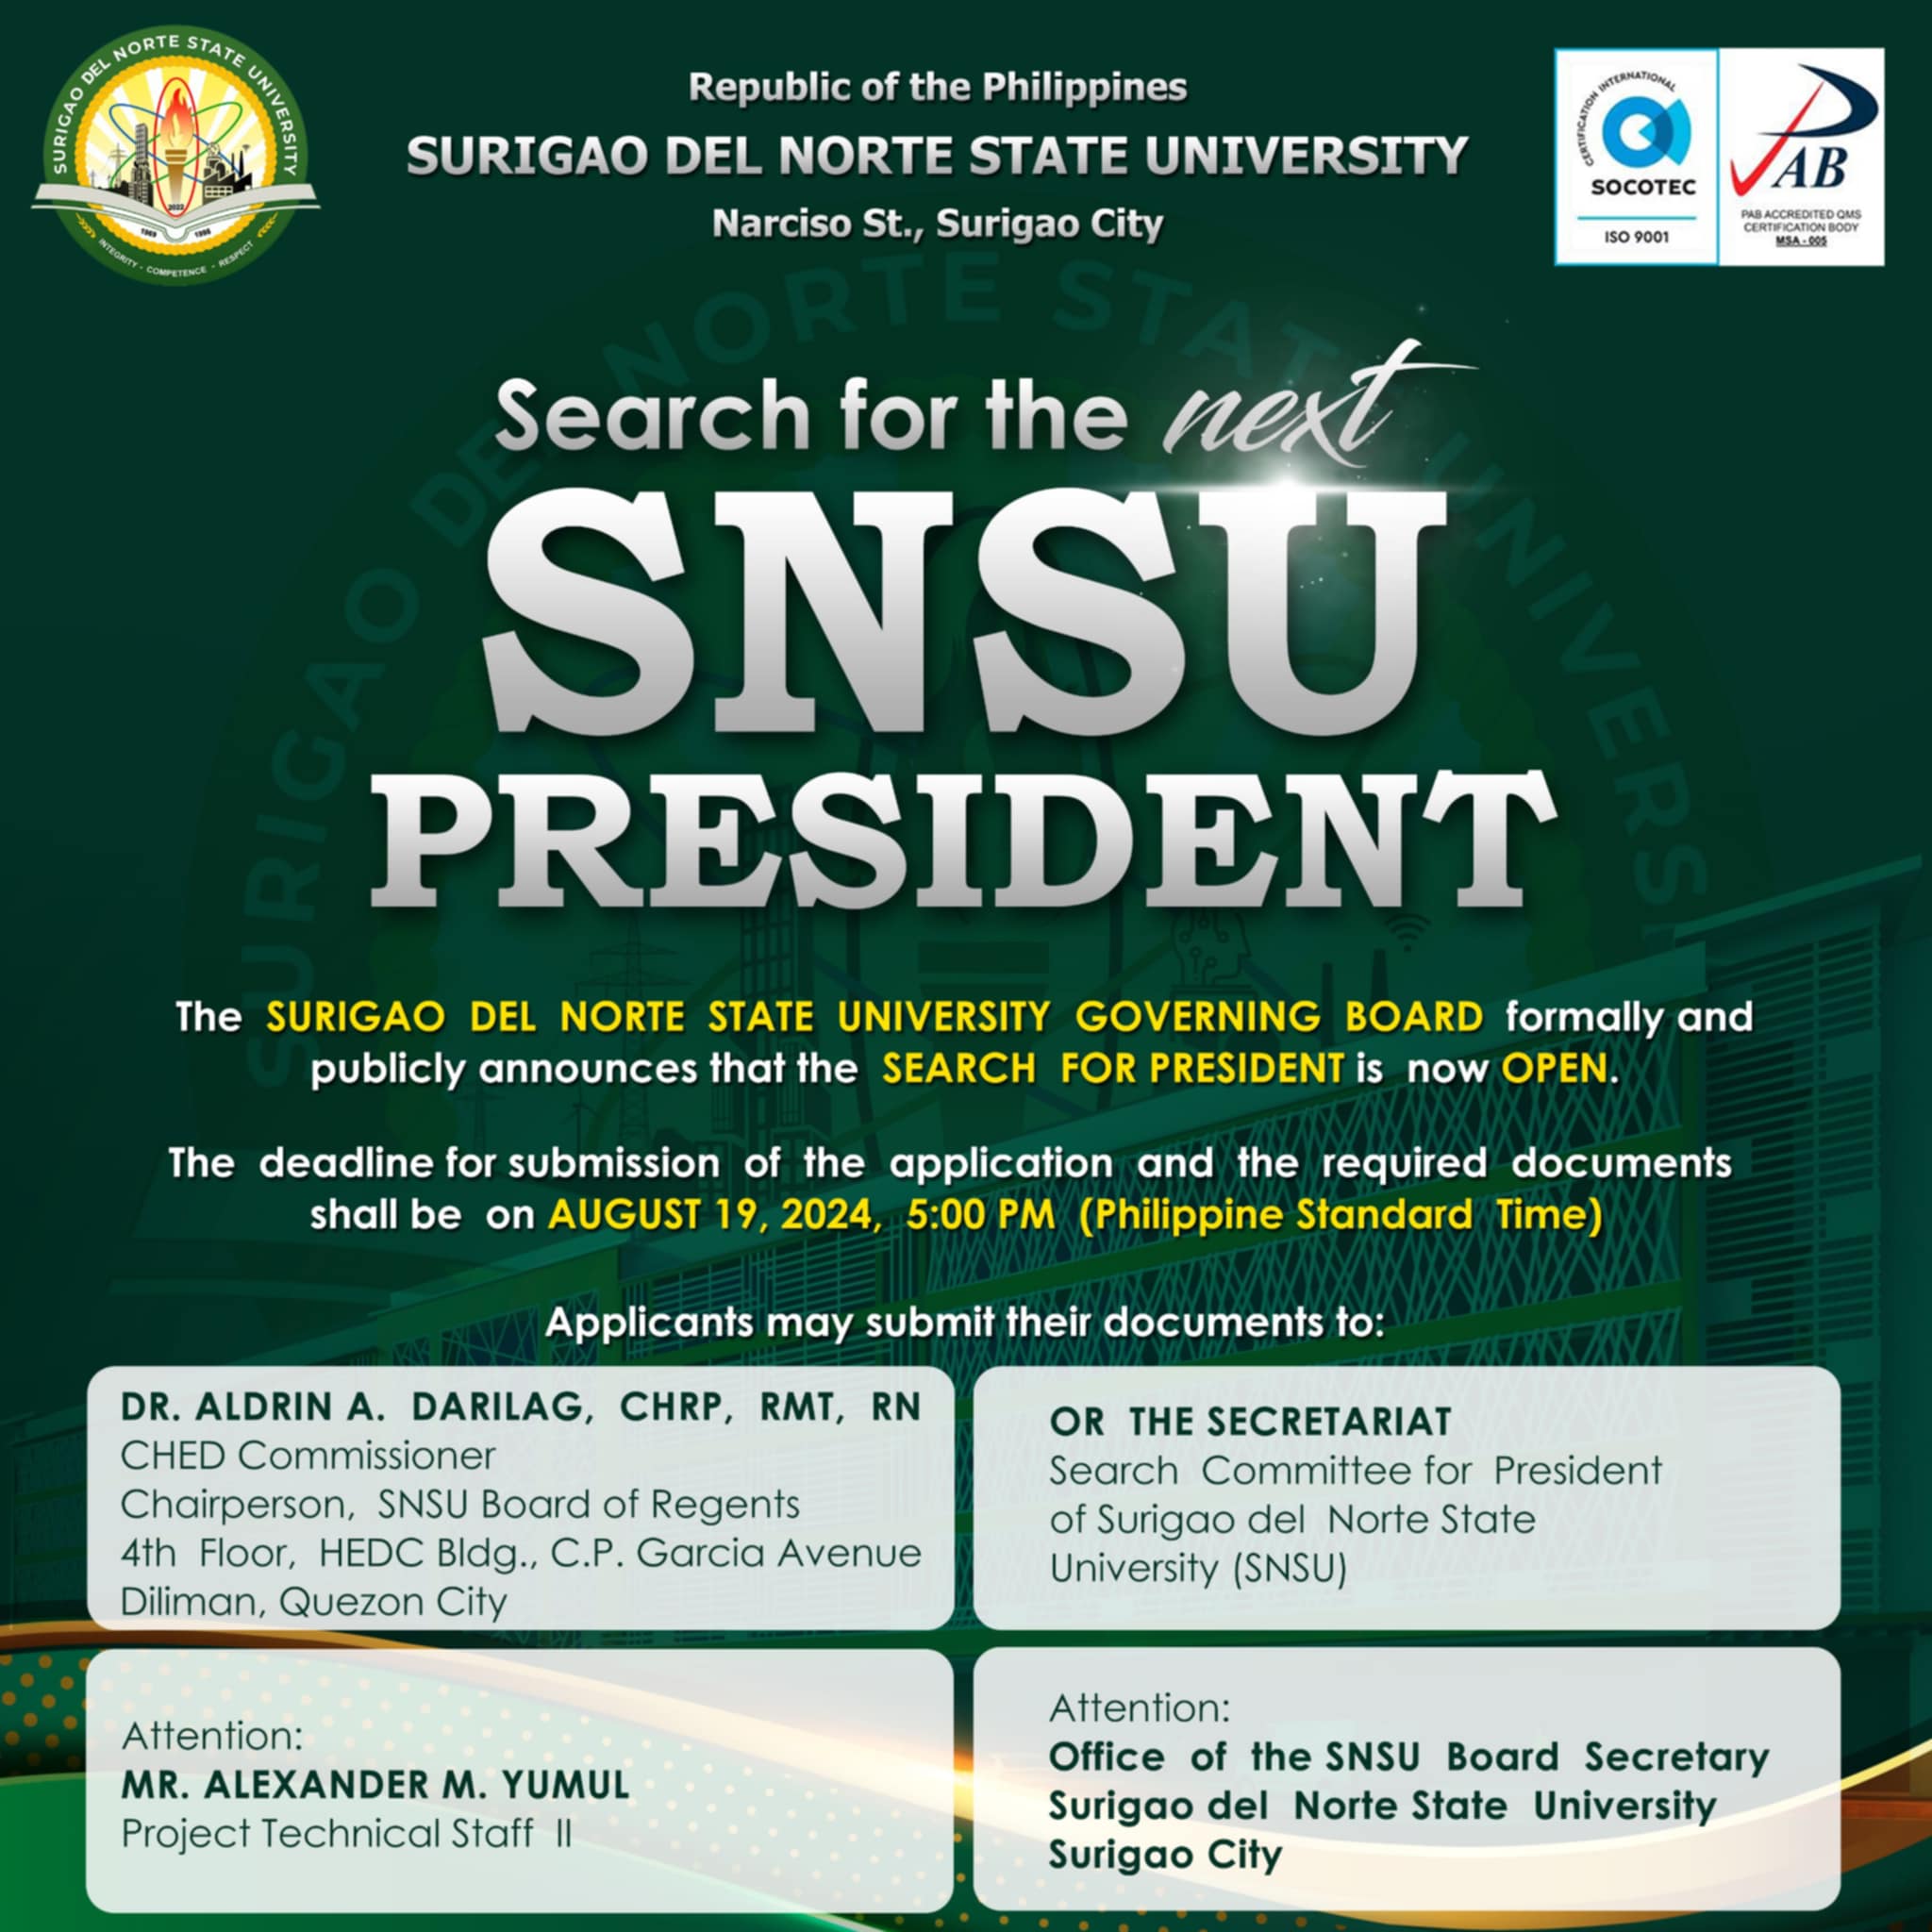 Search for the next SNSU President